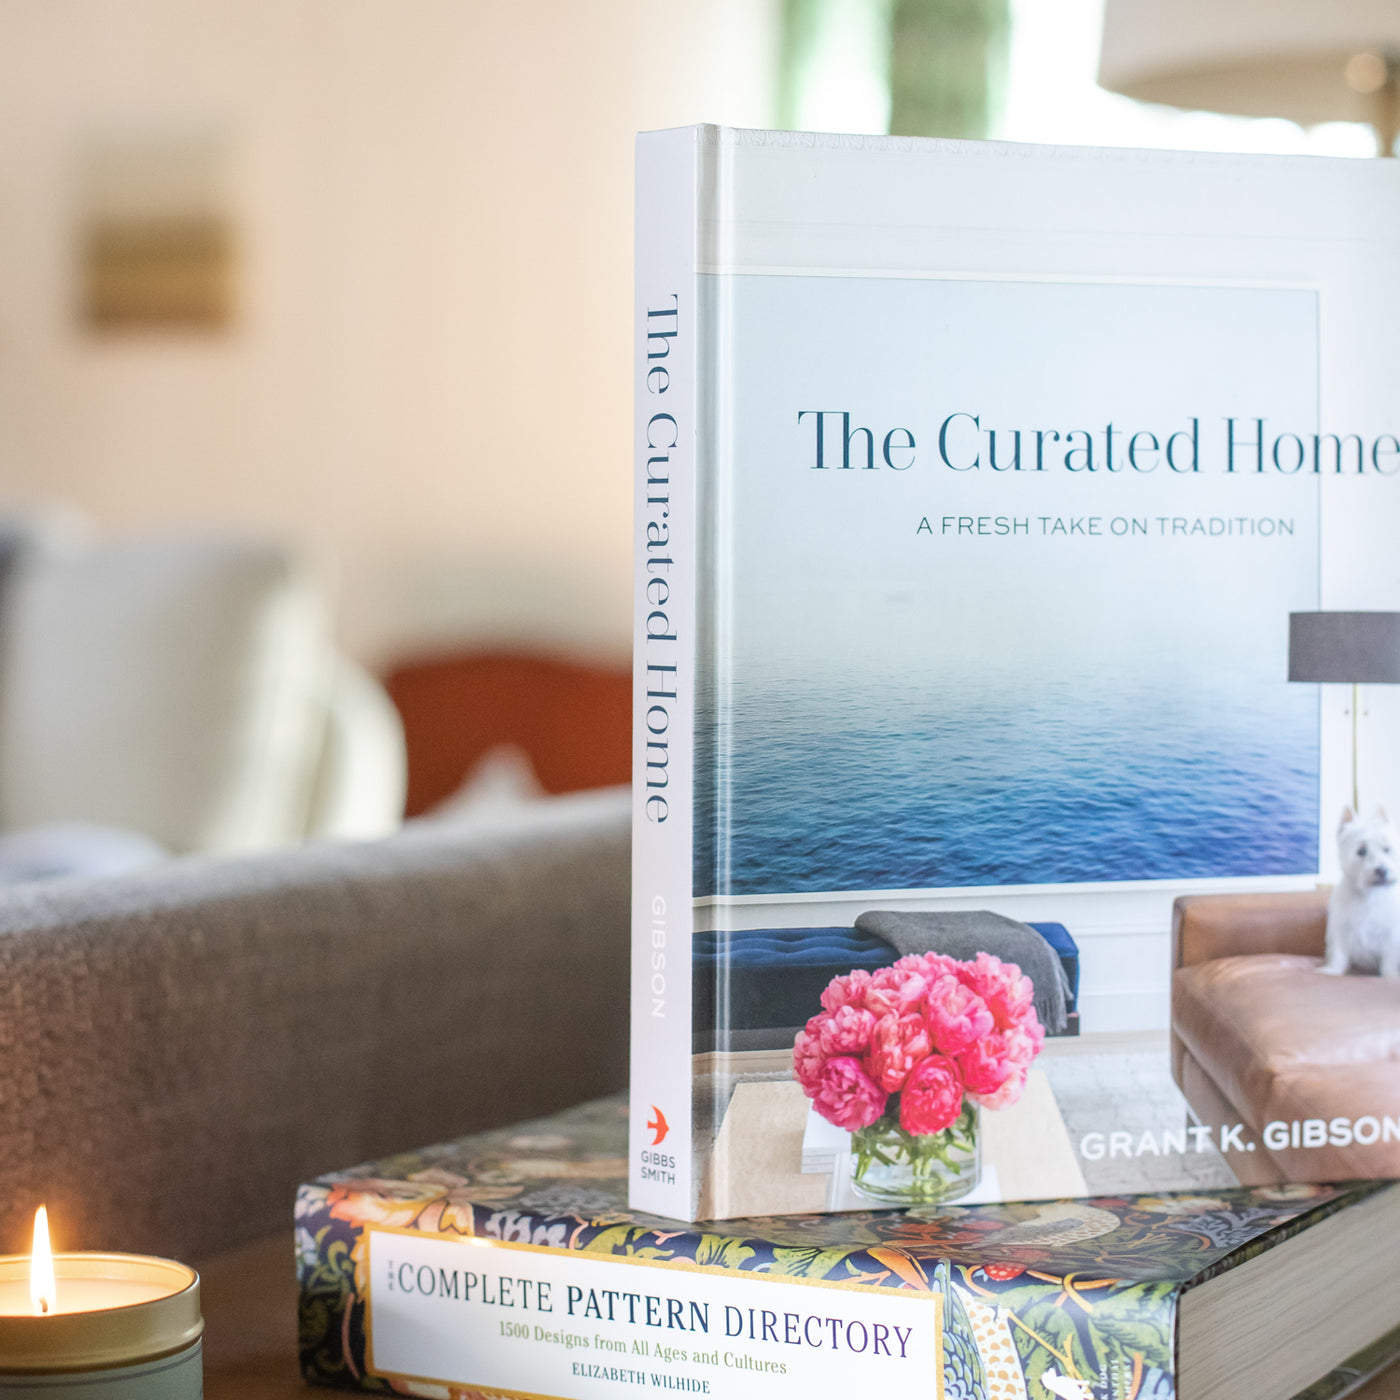 The Curated Home by Grant K. Gibson